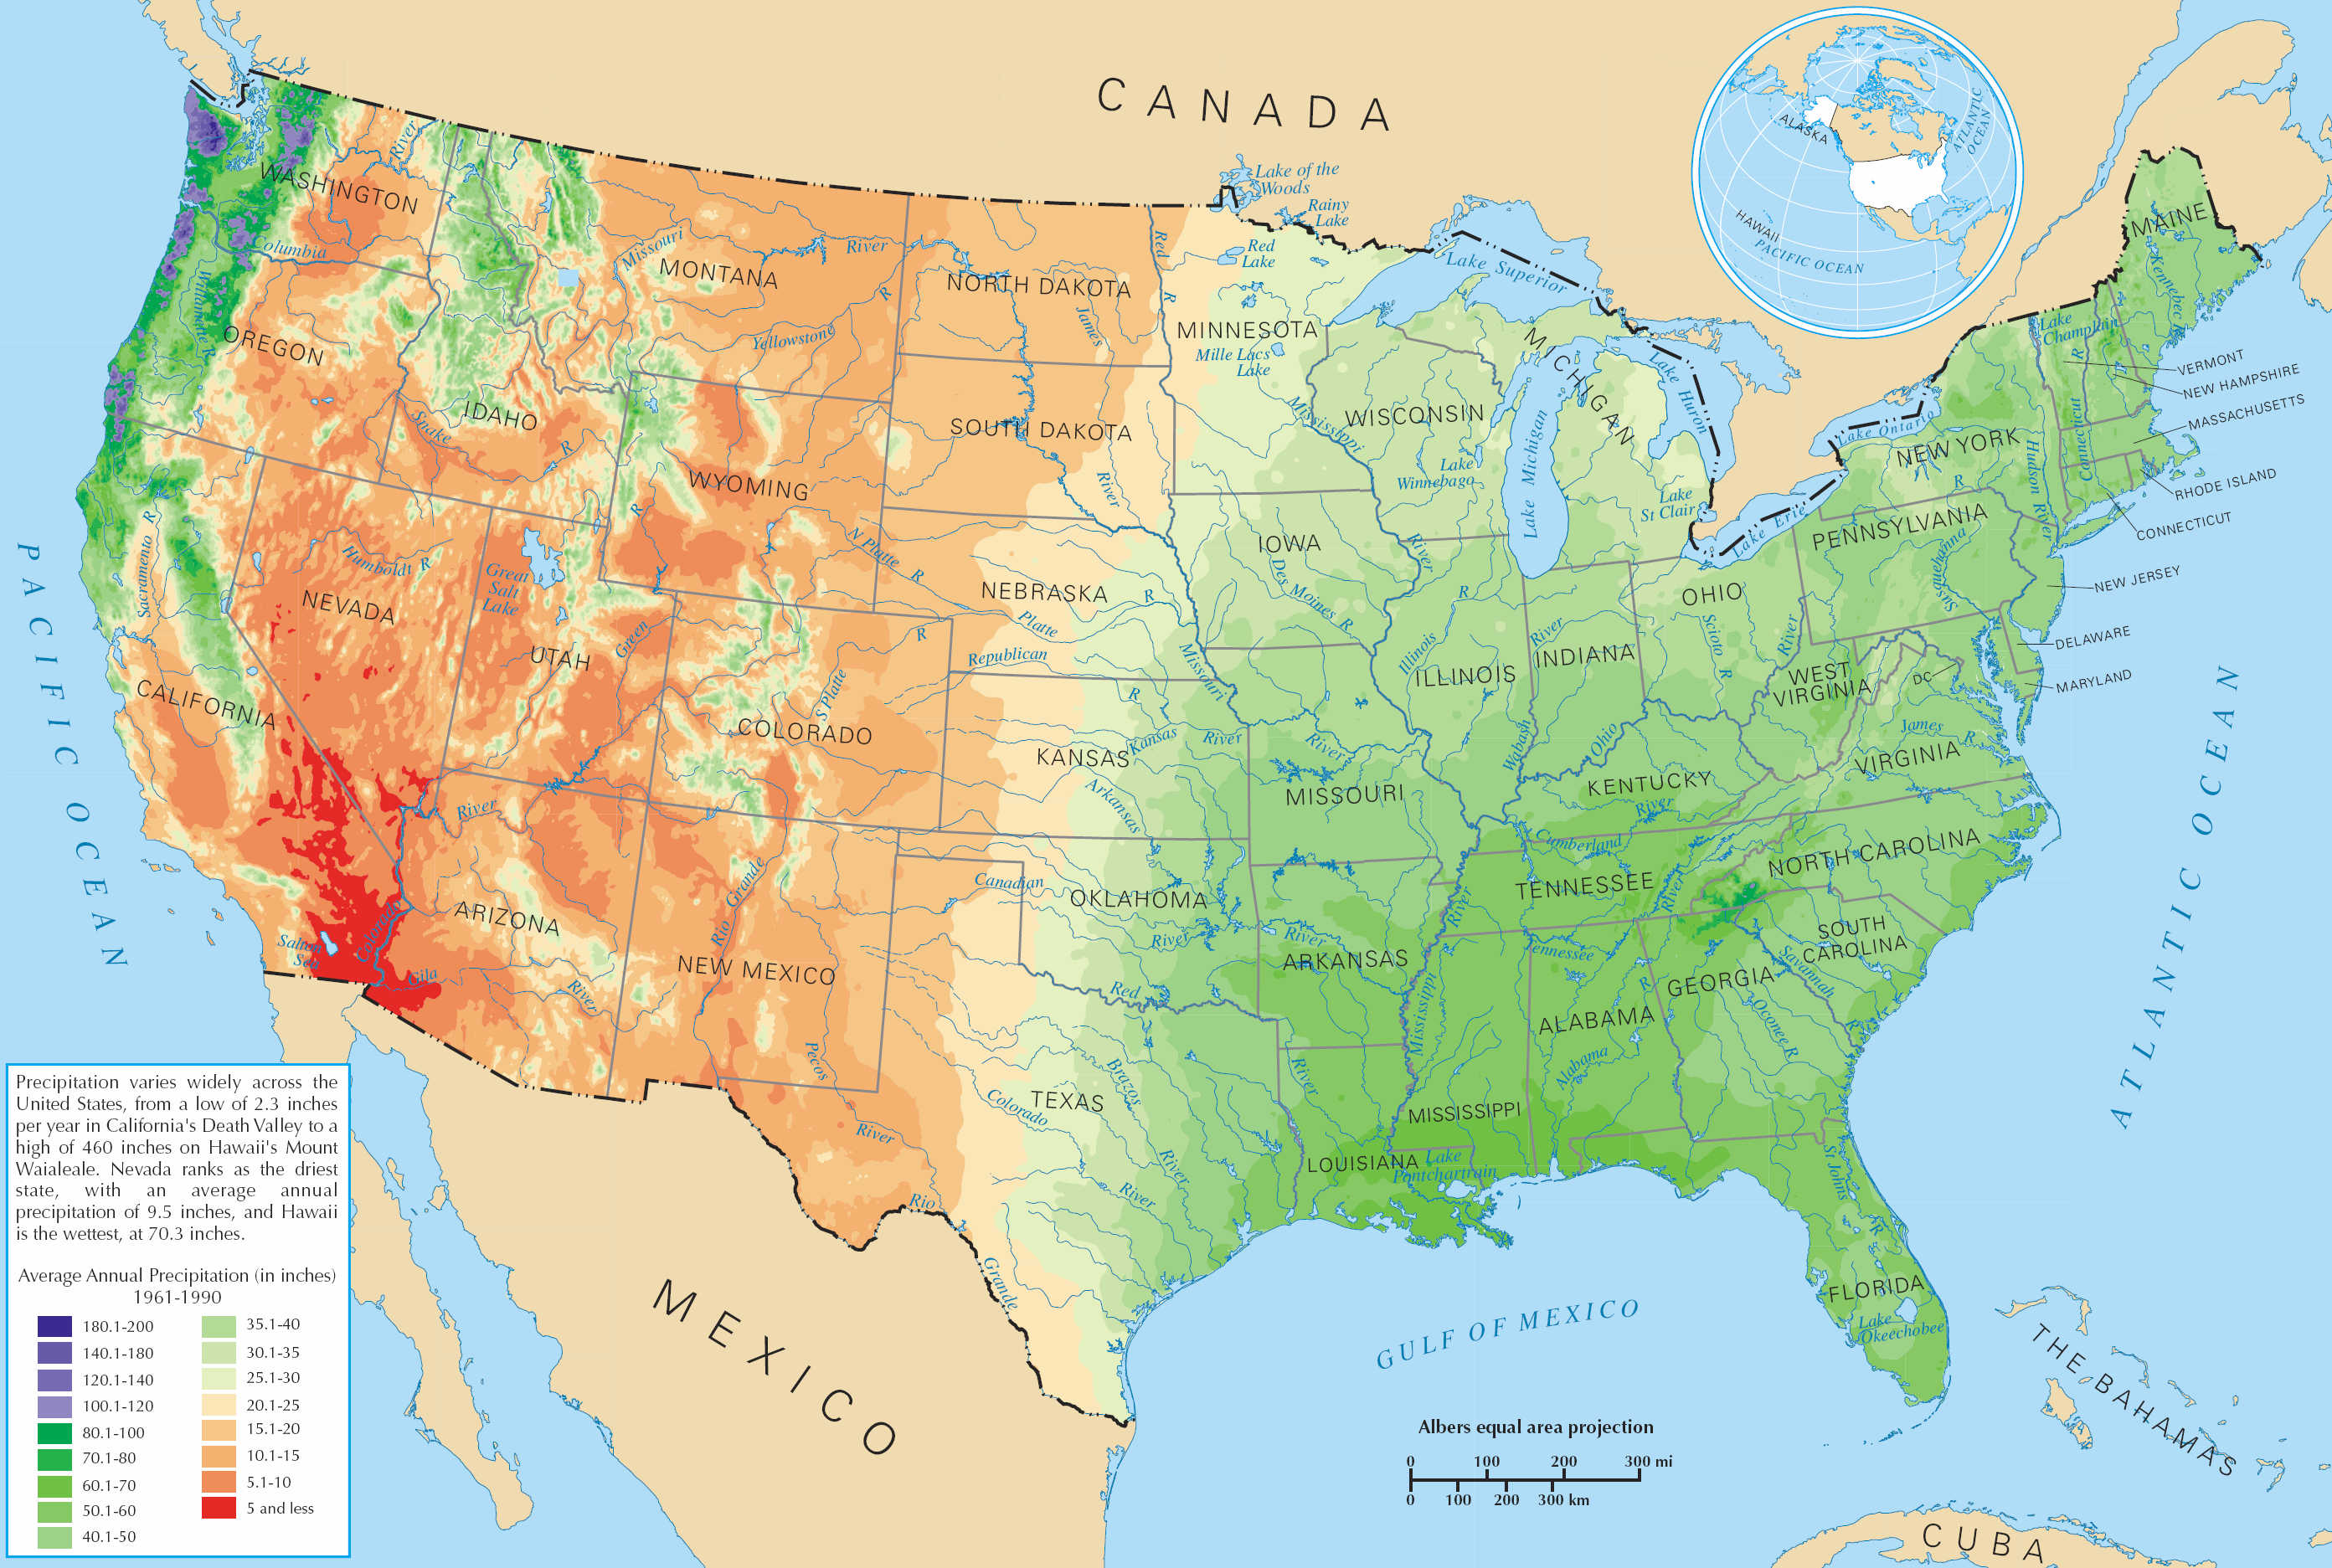 http://upload.wikimedia.org/wikipedia/commons/d/d3/Average_precipitation_in_the_lower_48_states_of_the_USA.png